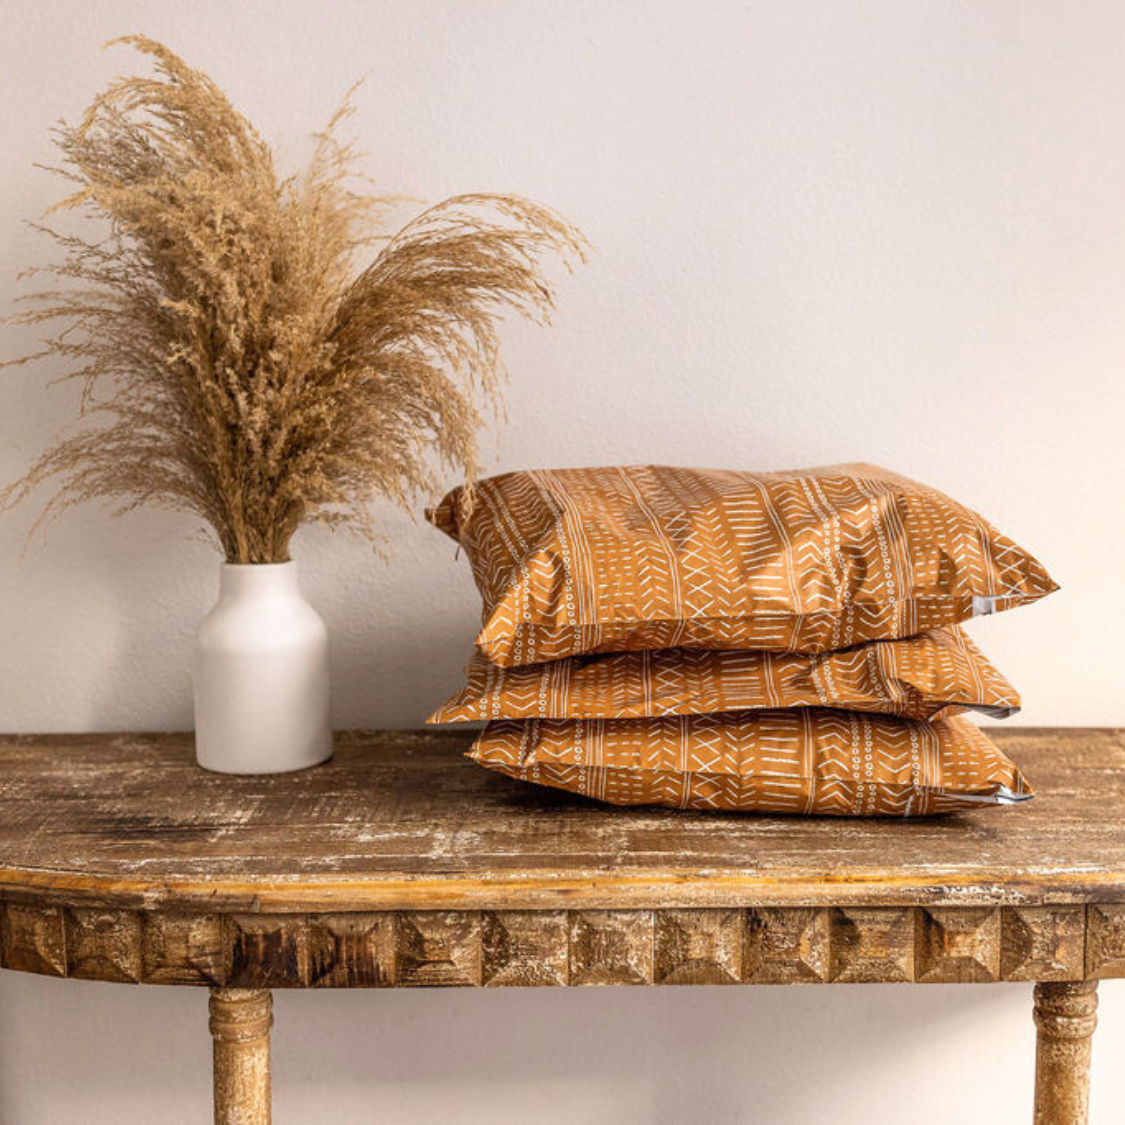 Boho Brown Poly Mailer from Favorite Supplies displayed on a table next to a plant, offering a size perspective with its compact design (10x13) and stylish aesthetic.